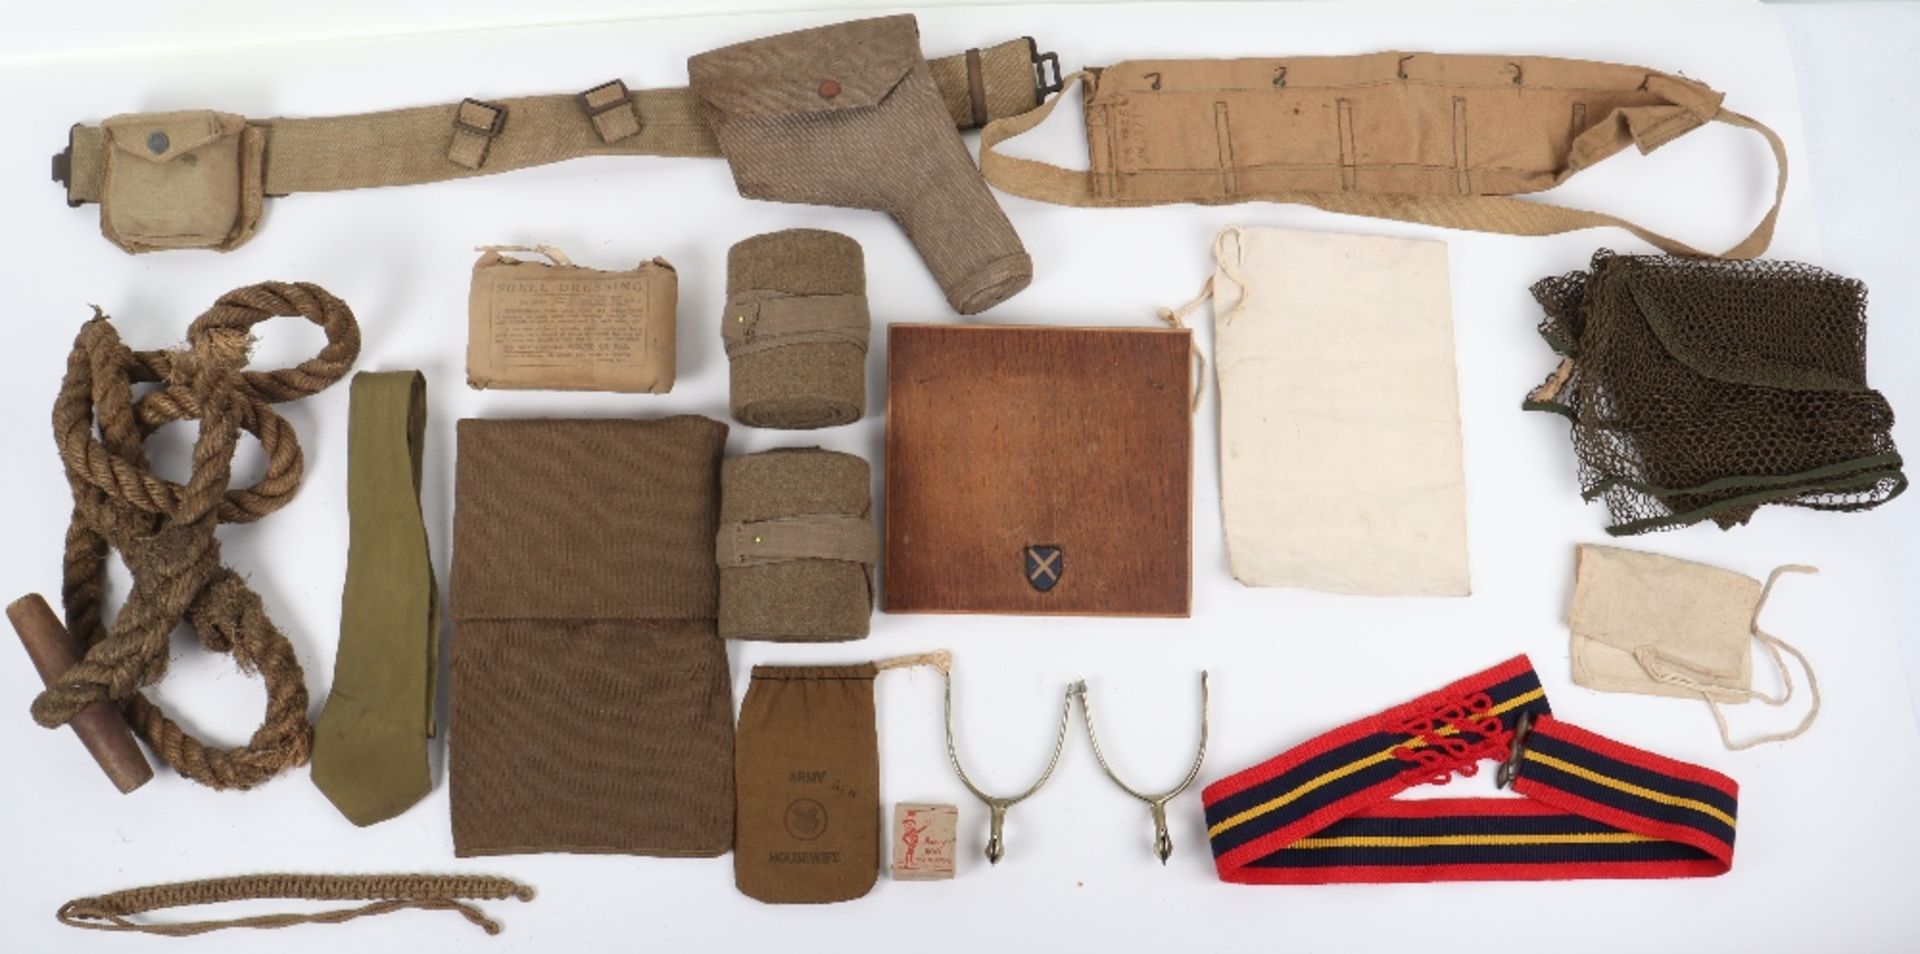 Commando Hat Comforter, Rope and other militaria